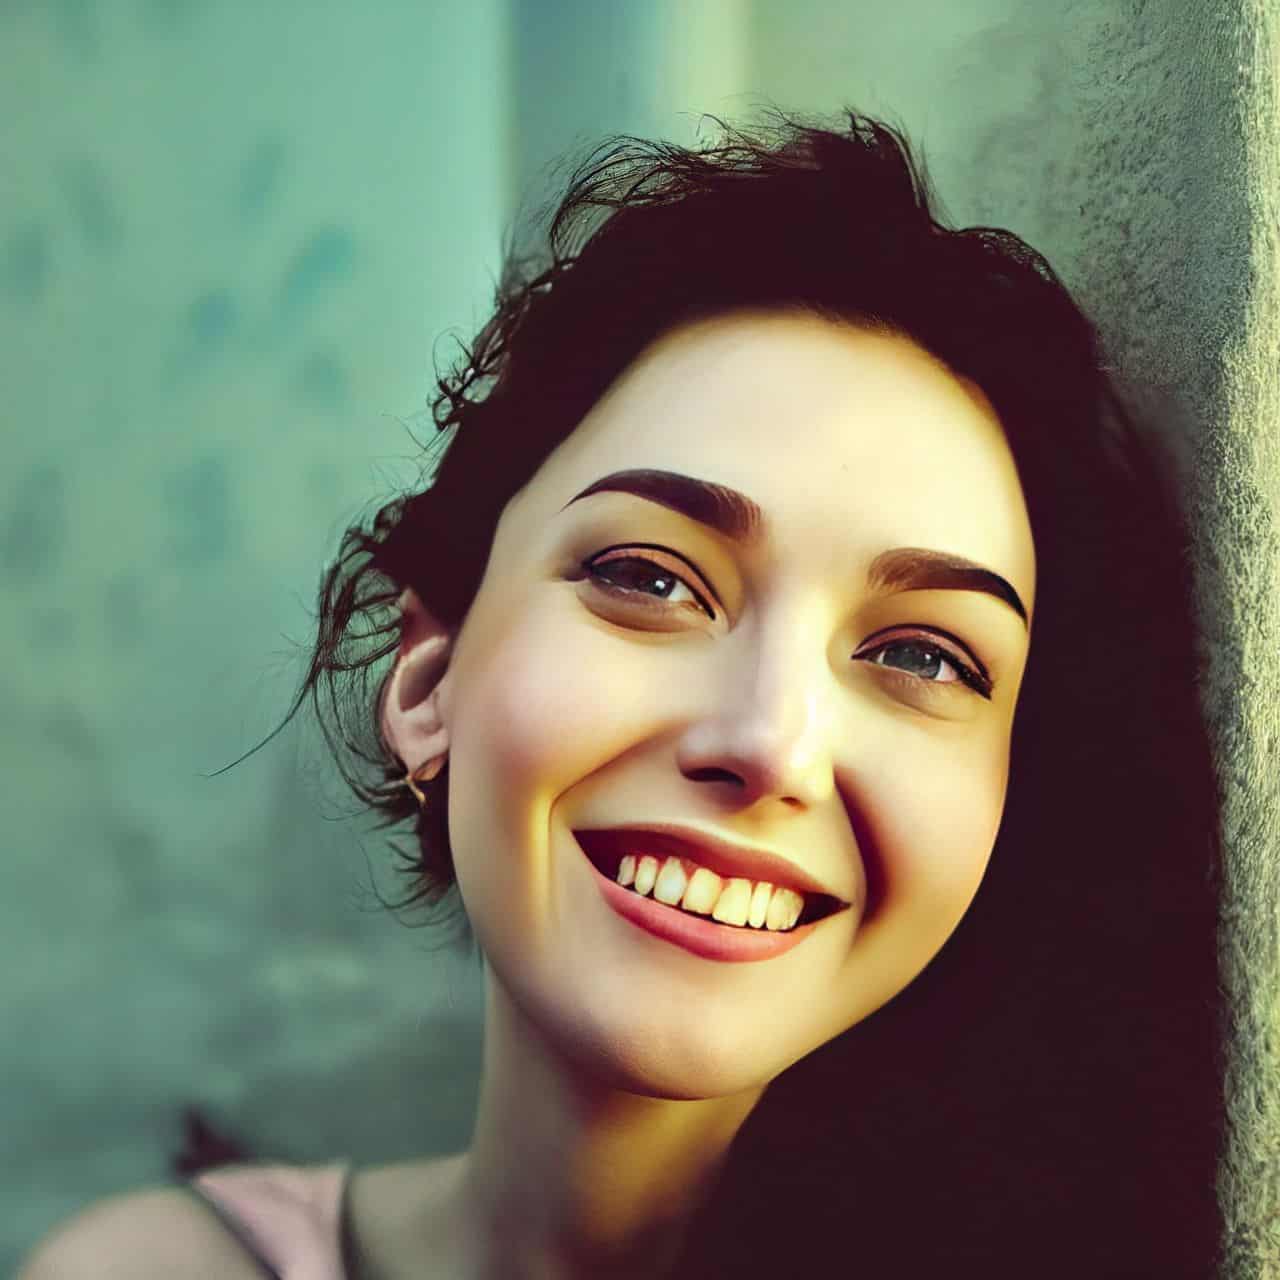 cheery smiling woman